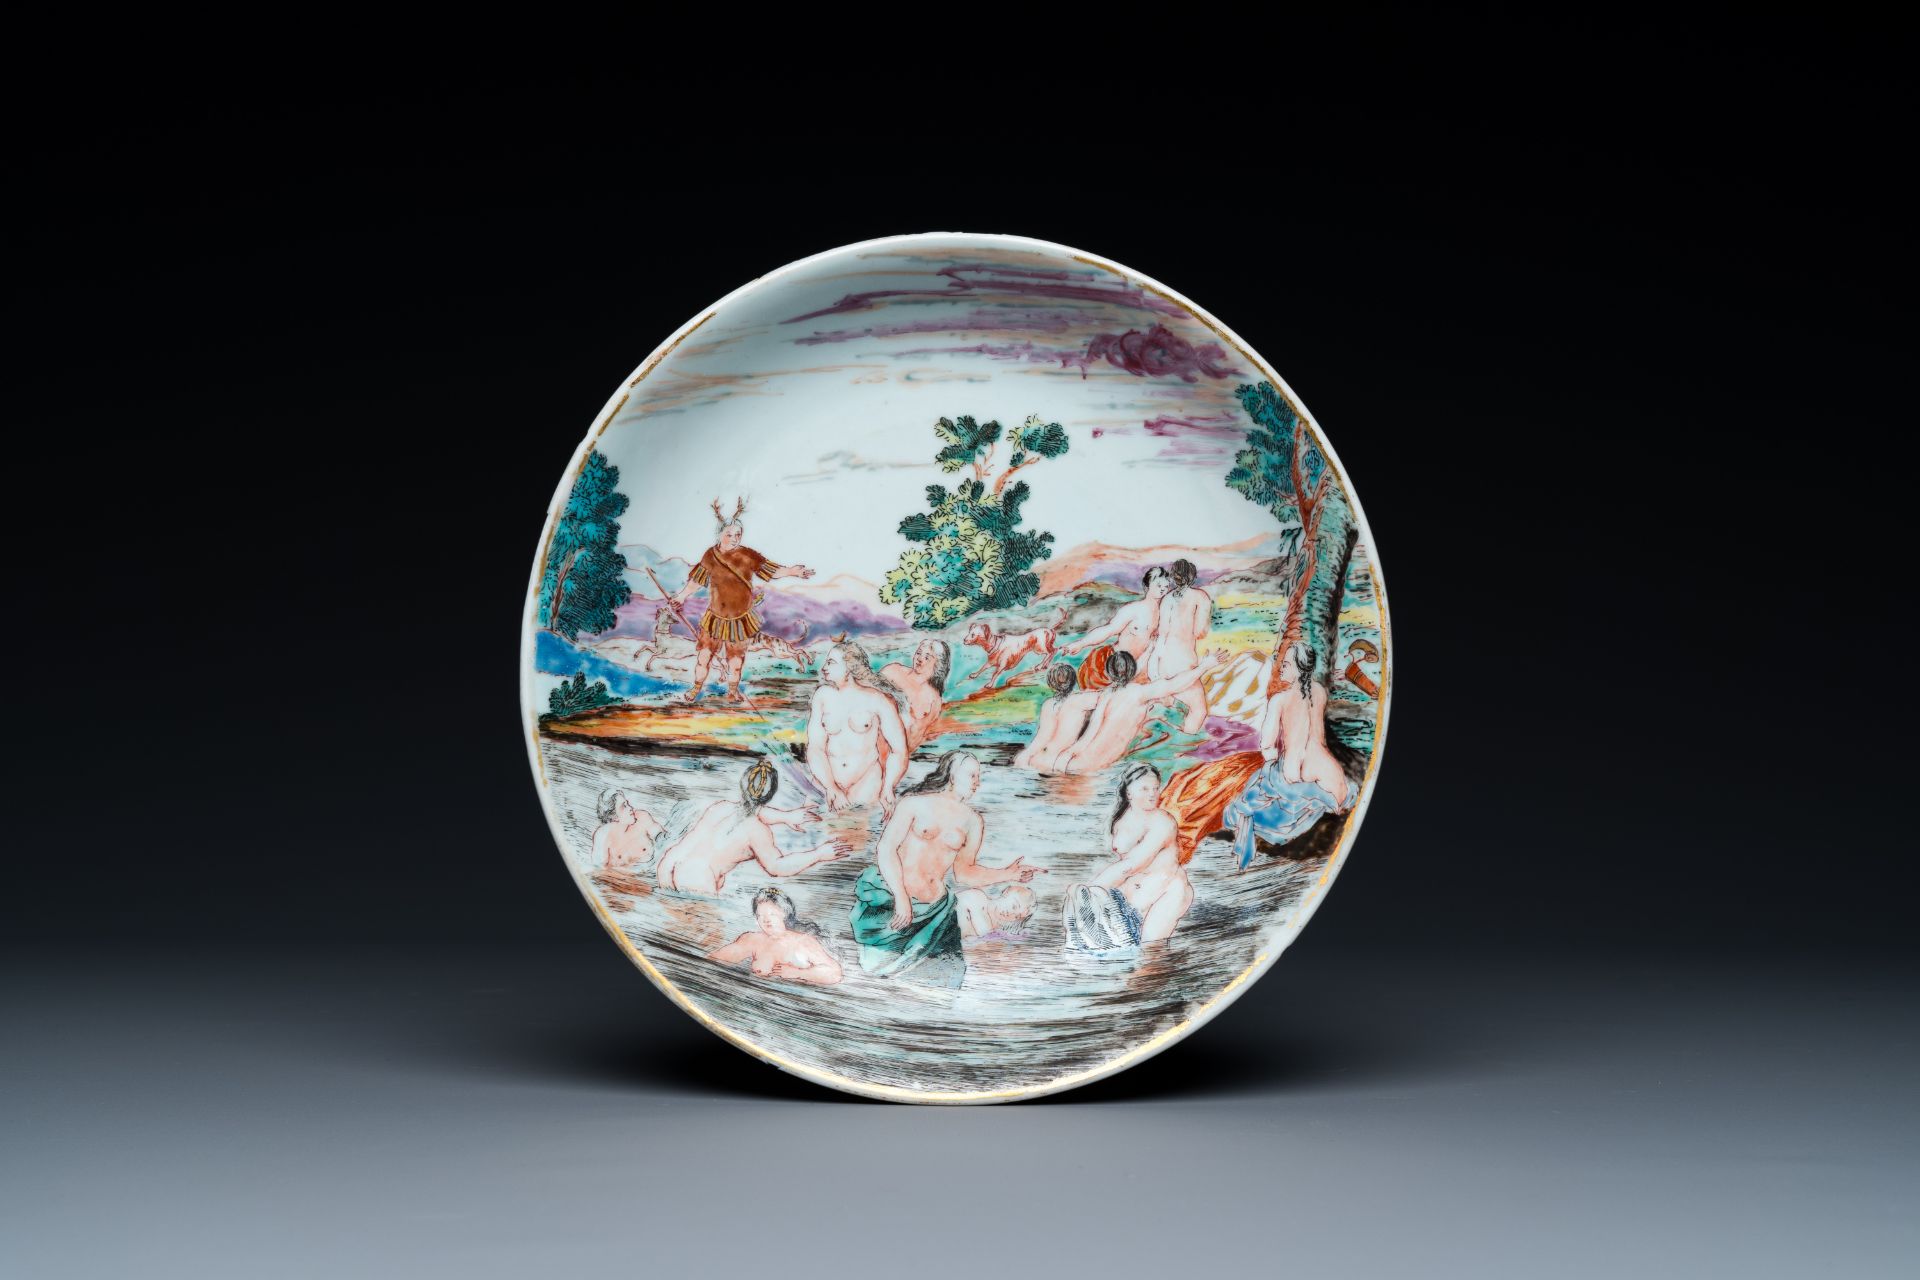 A rare Dutch-decorated Chinese eggshell 'Diana and Actaeon' plate with Dutch inscription on the back